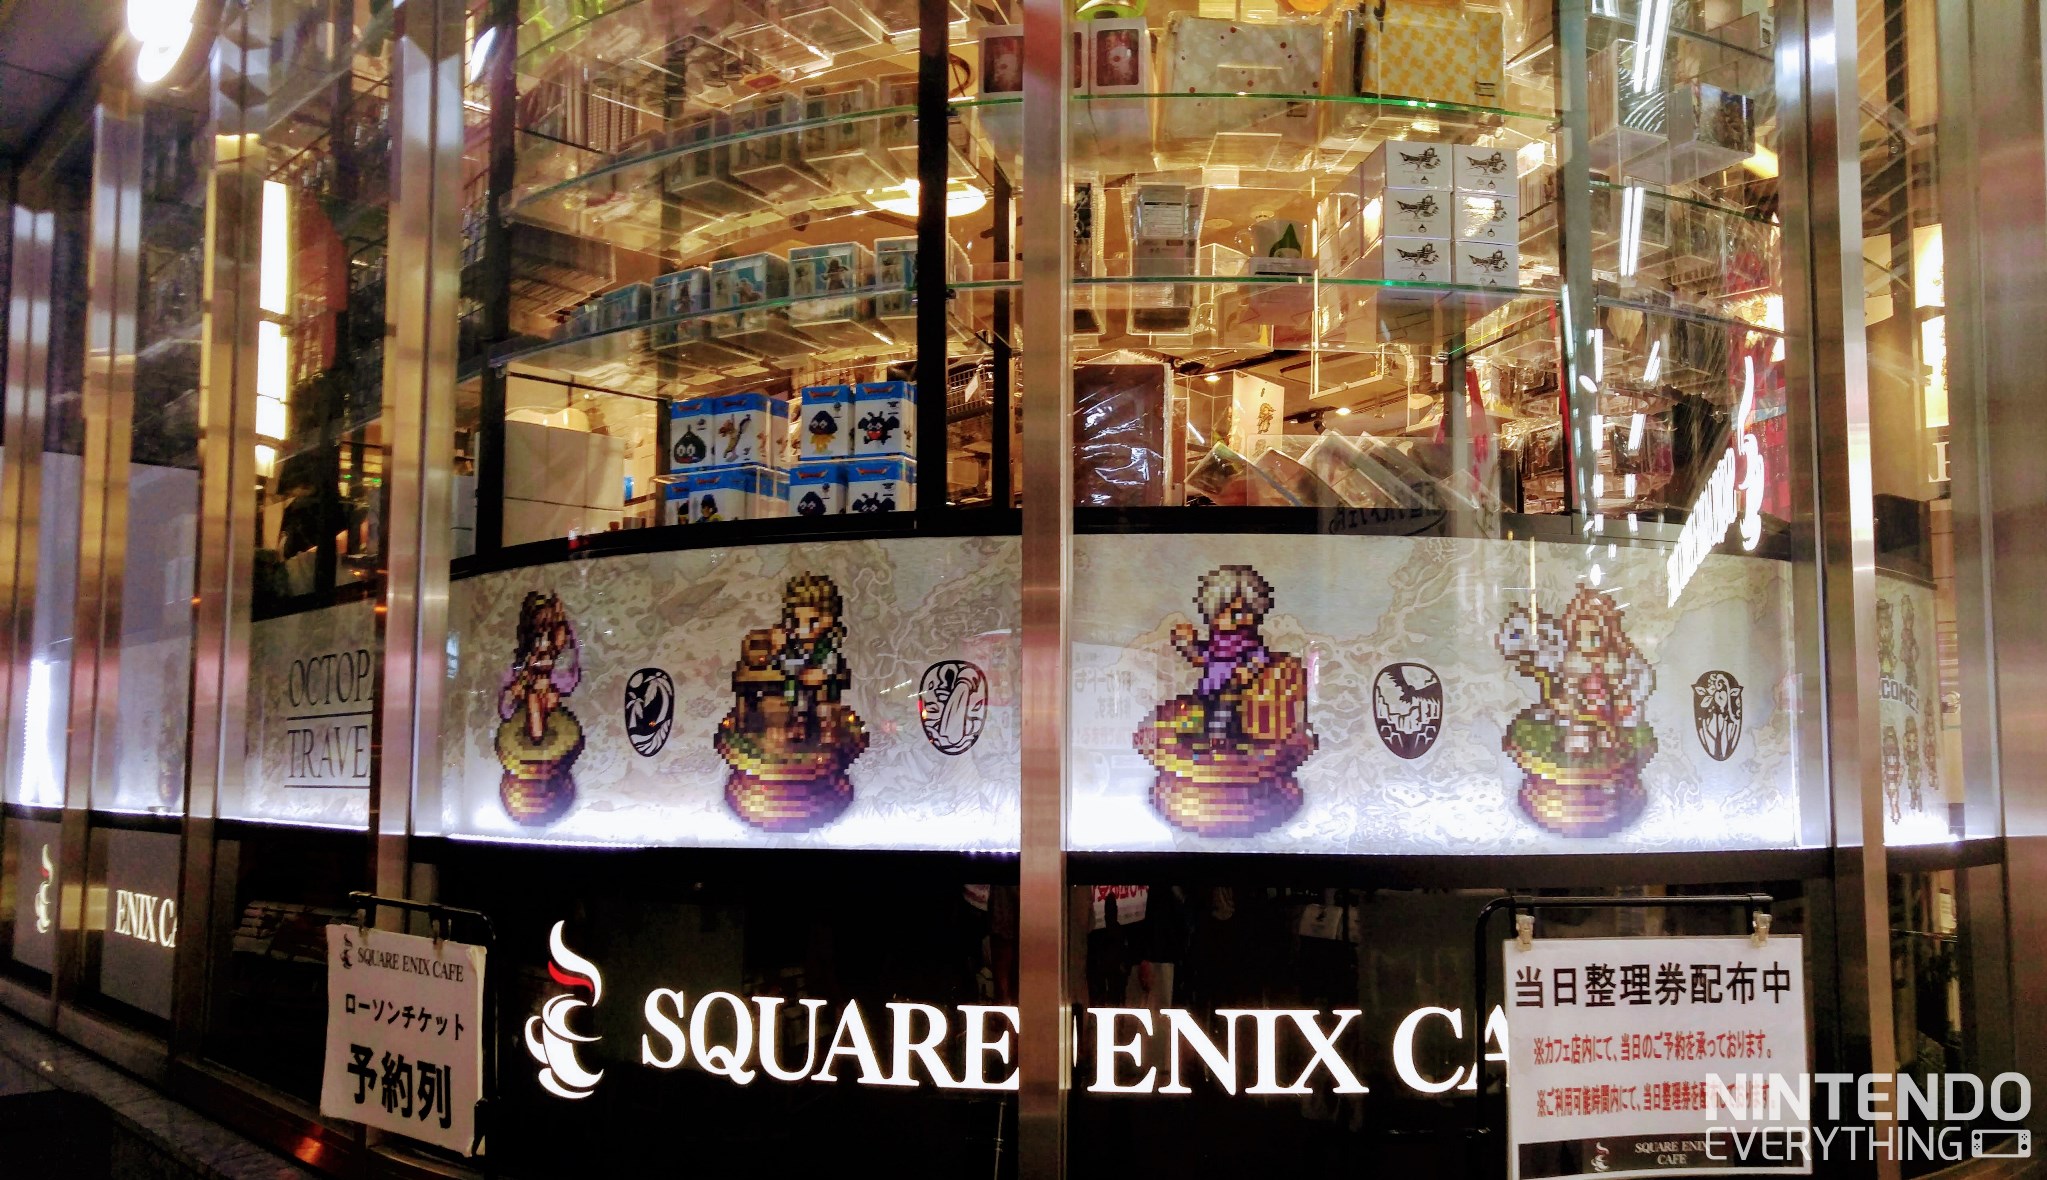 Square Enix Has a Café In Tokyo, and It's Sold Out